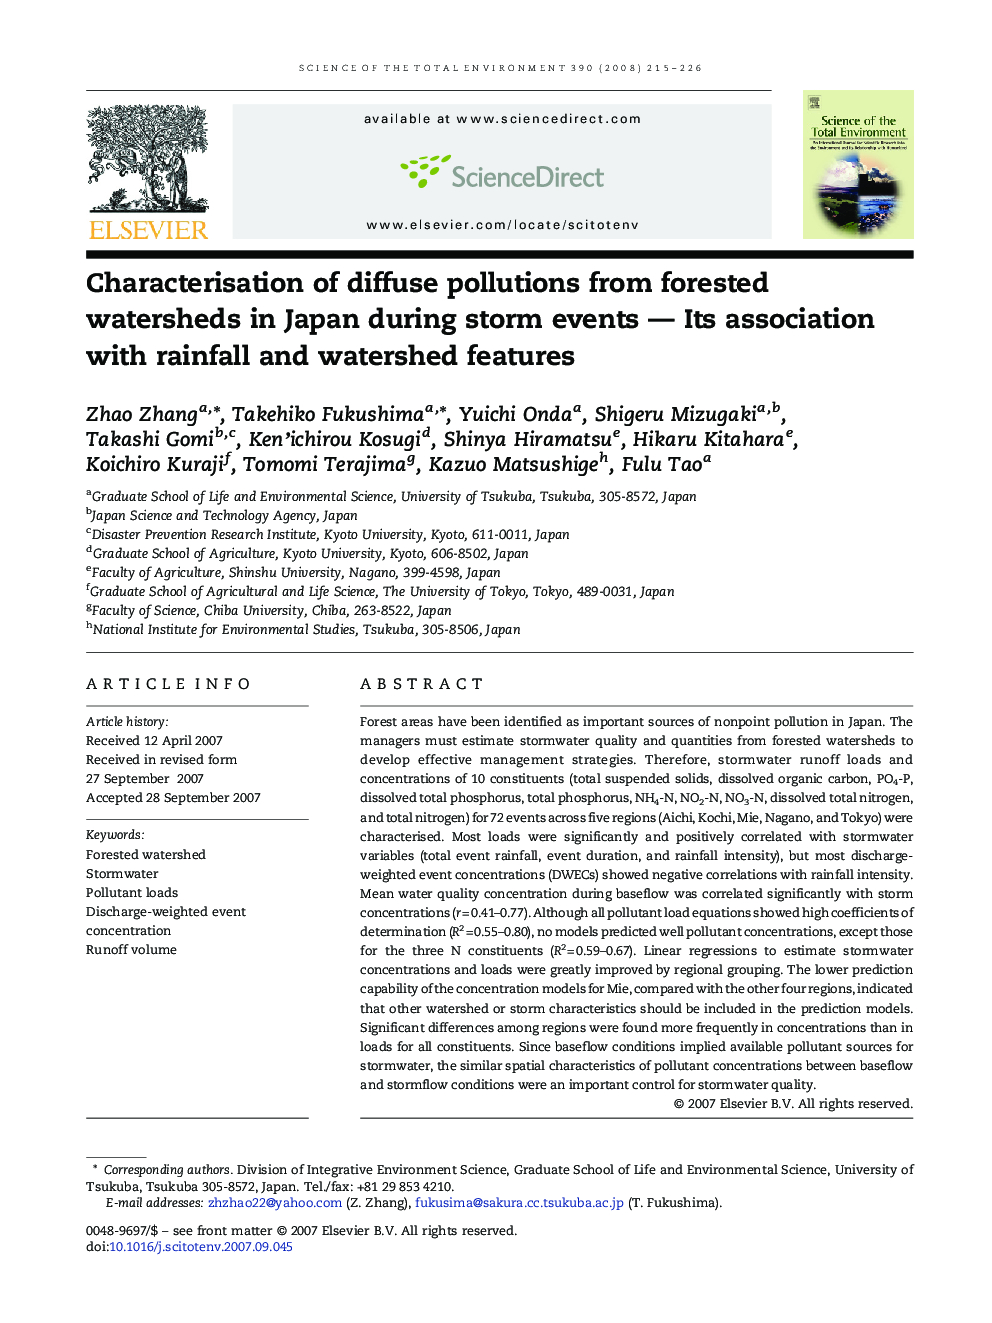 Characterisation of diffuse pollutions from forested watersheds in Japan during storm events — Its association with rainfall and watershed features